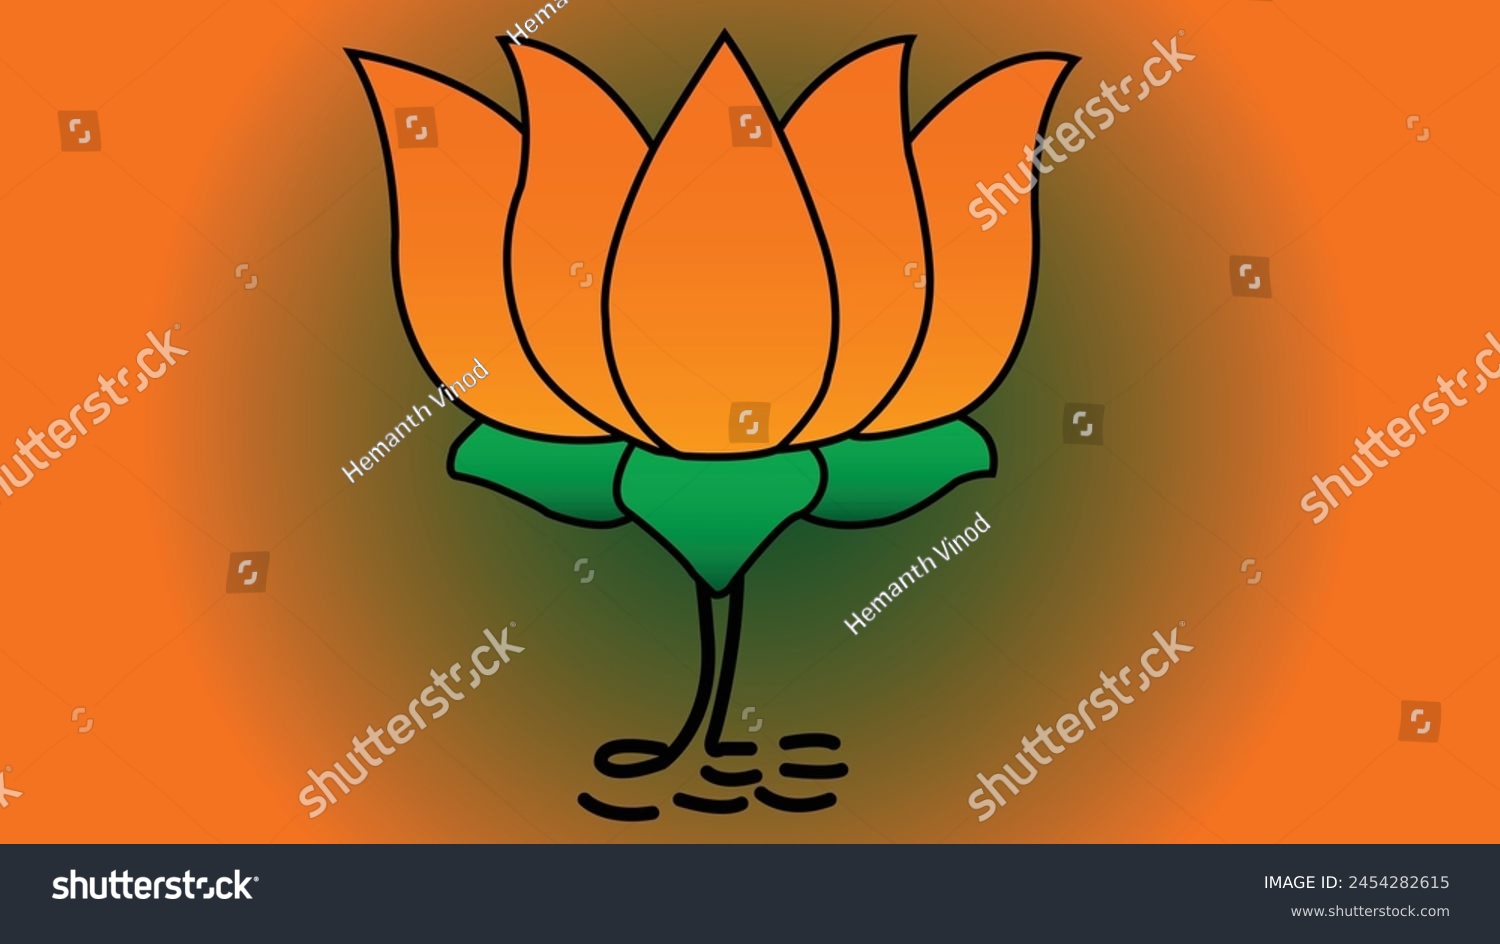 SVG of Bharatiya Janata party,BJP logo of Lotus flower in saffron and green colour vector. svg